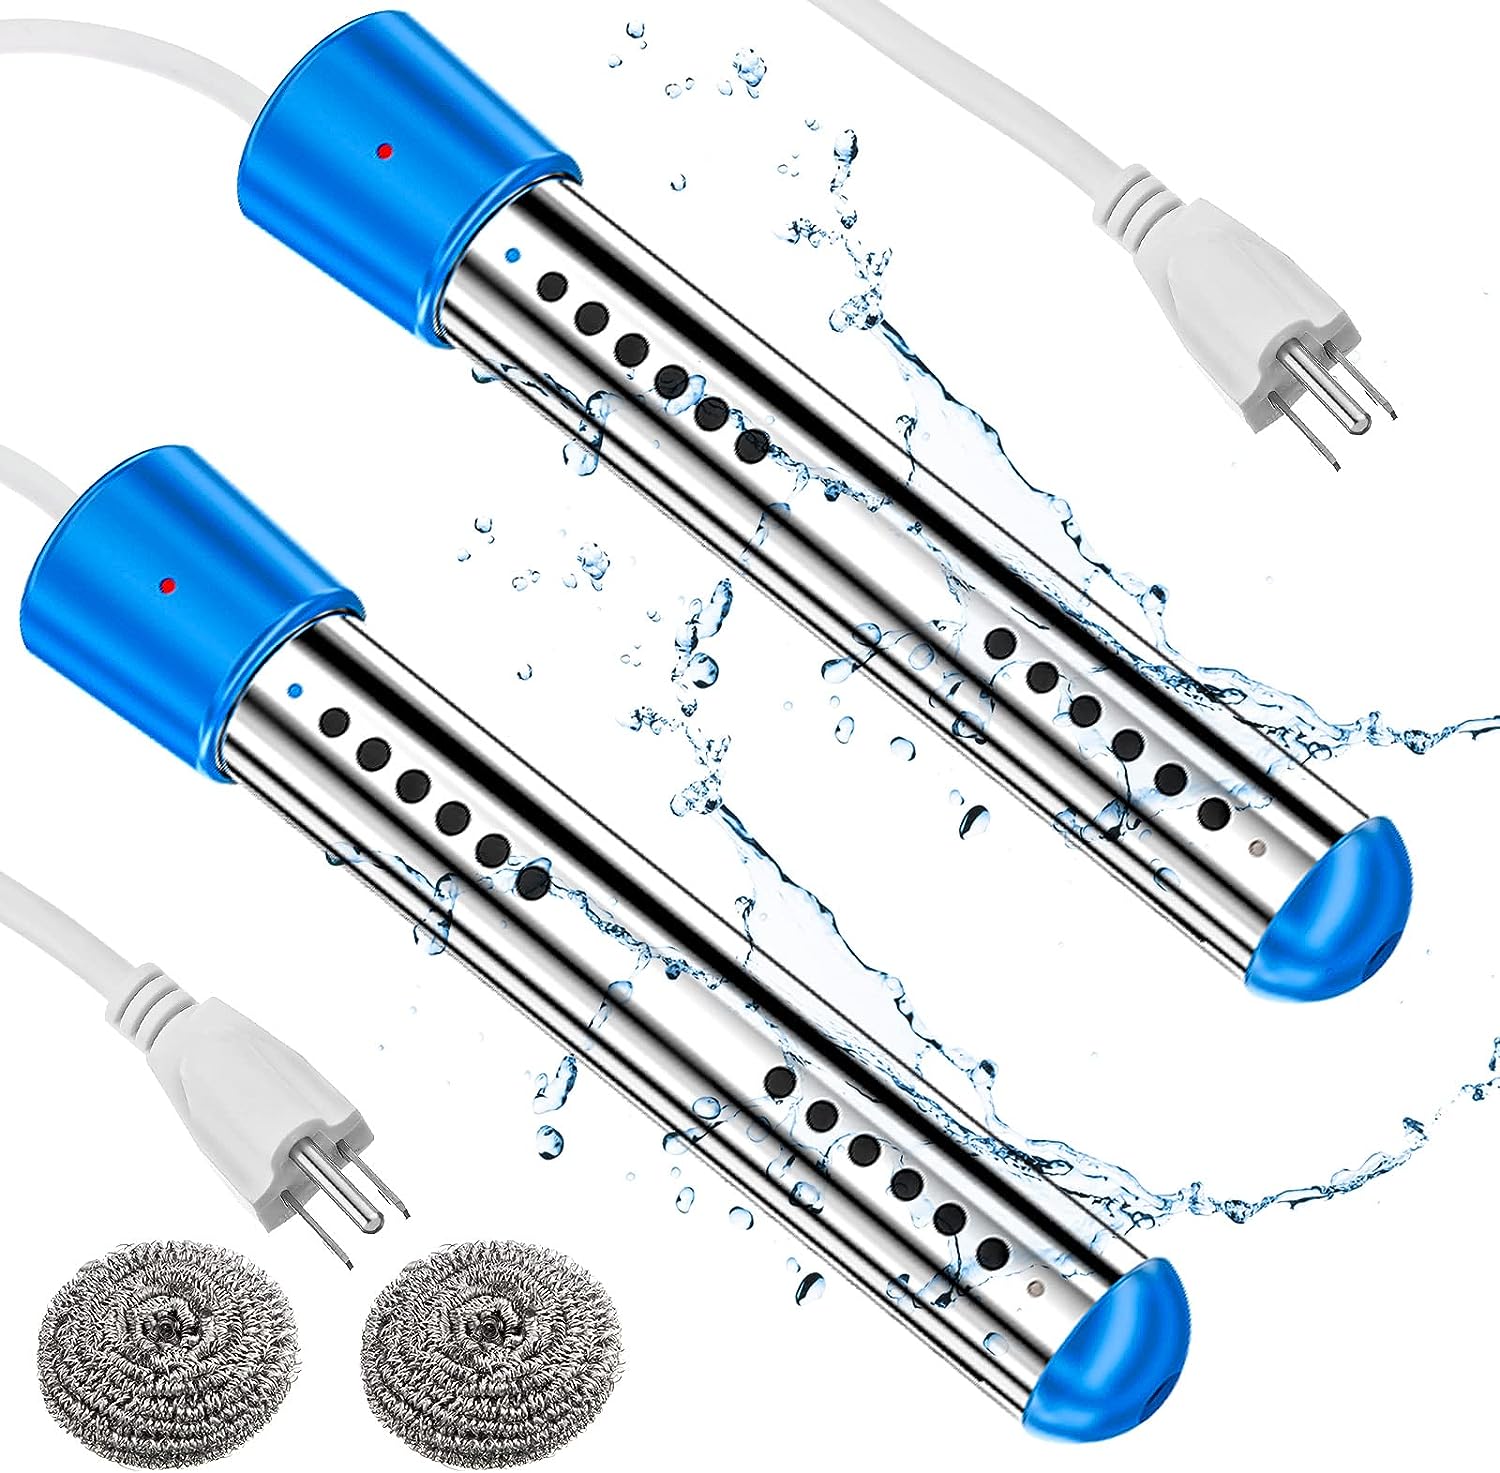 2 Pcs Immersion Water Heater Pool Heater Review